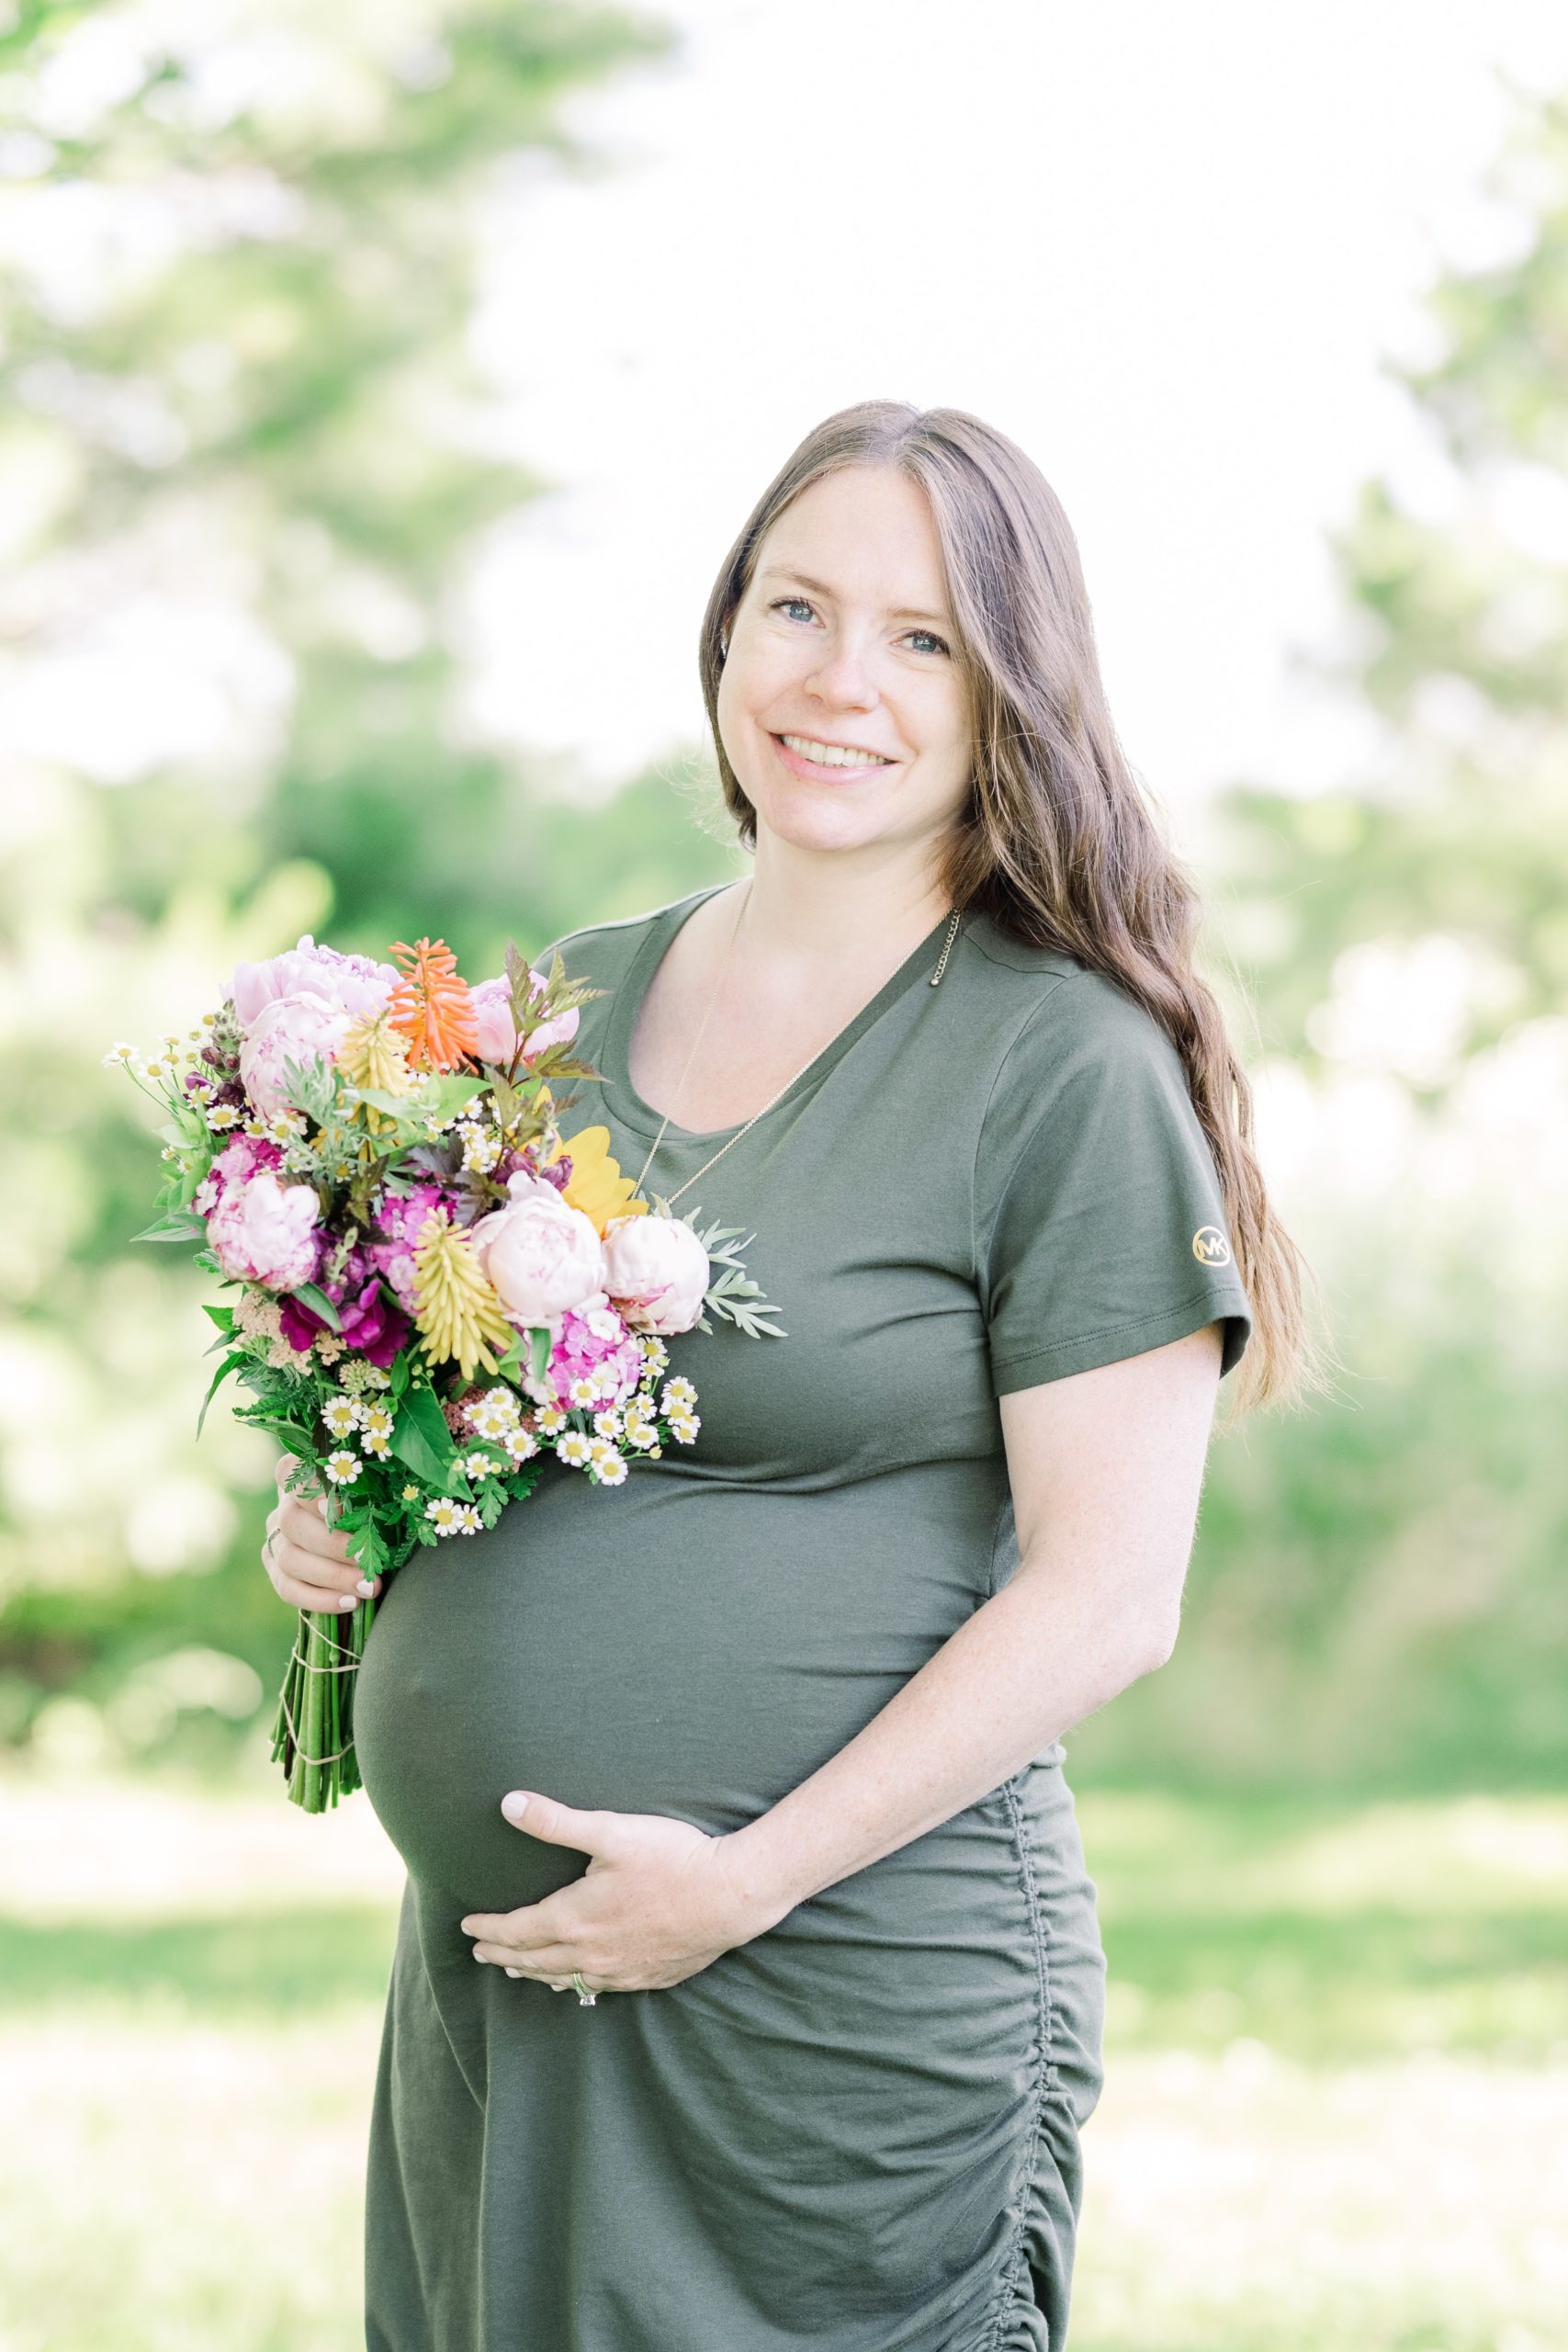 Mom holding baby bump and fresh flowers